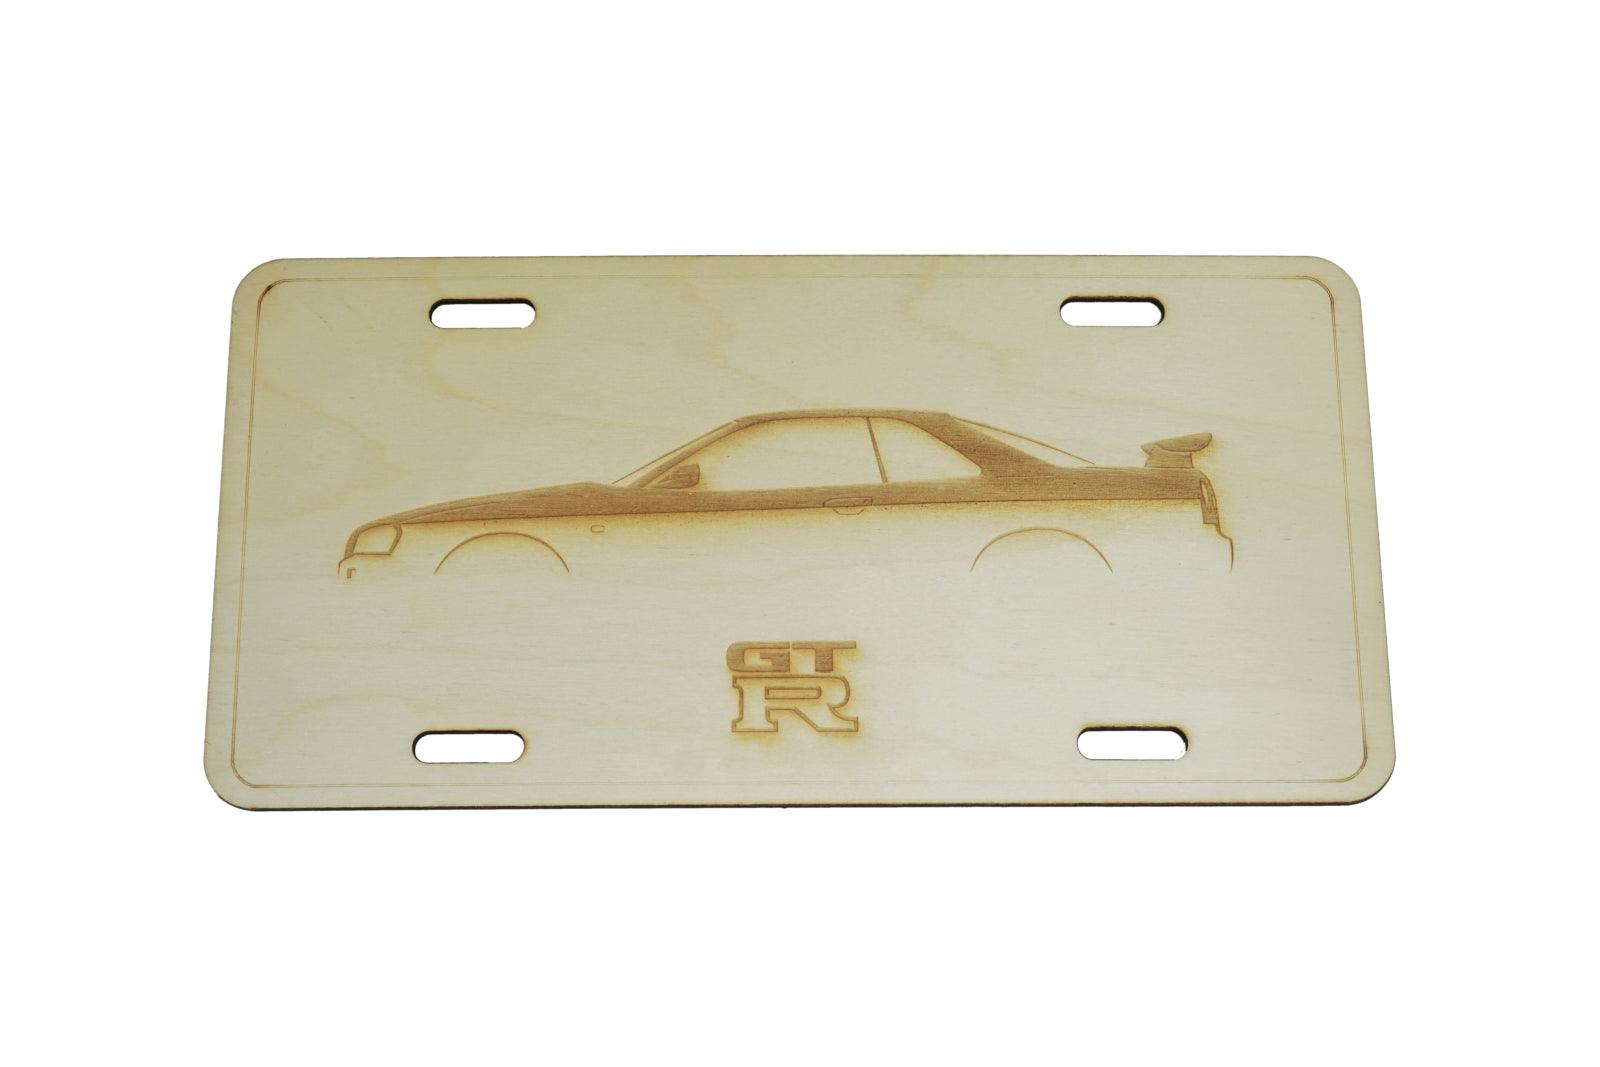 ZSPEC Nissan GTR R34 Cut-Away License Plate, Birch, Ornamental  1/8' Birch Plywood construction.  Approximately the same size as a traditional license plate ZSPEC Design LLC Toyota 4runner truck